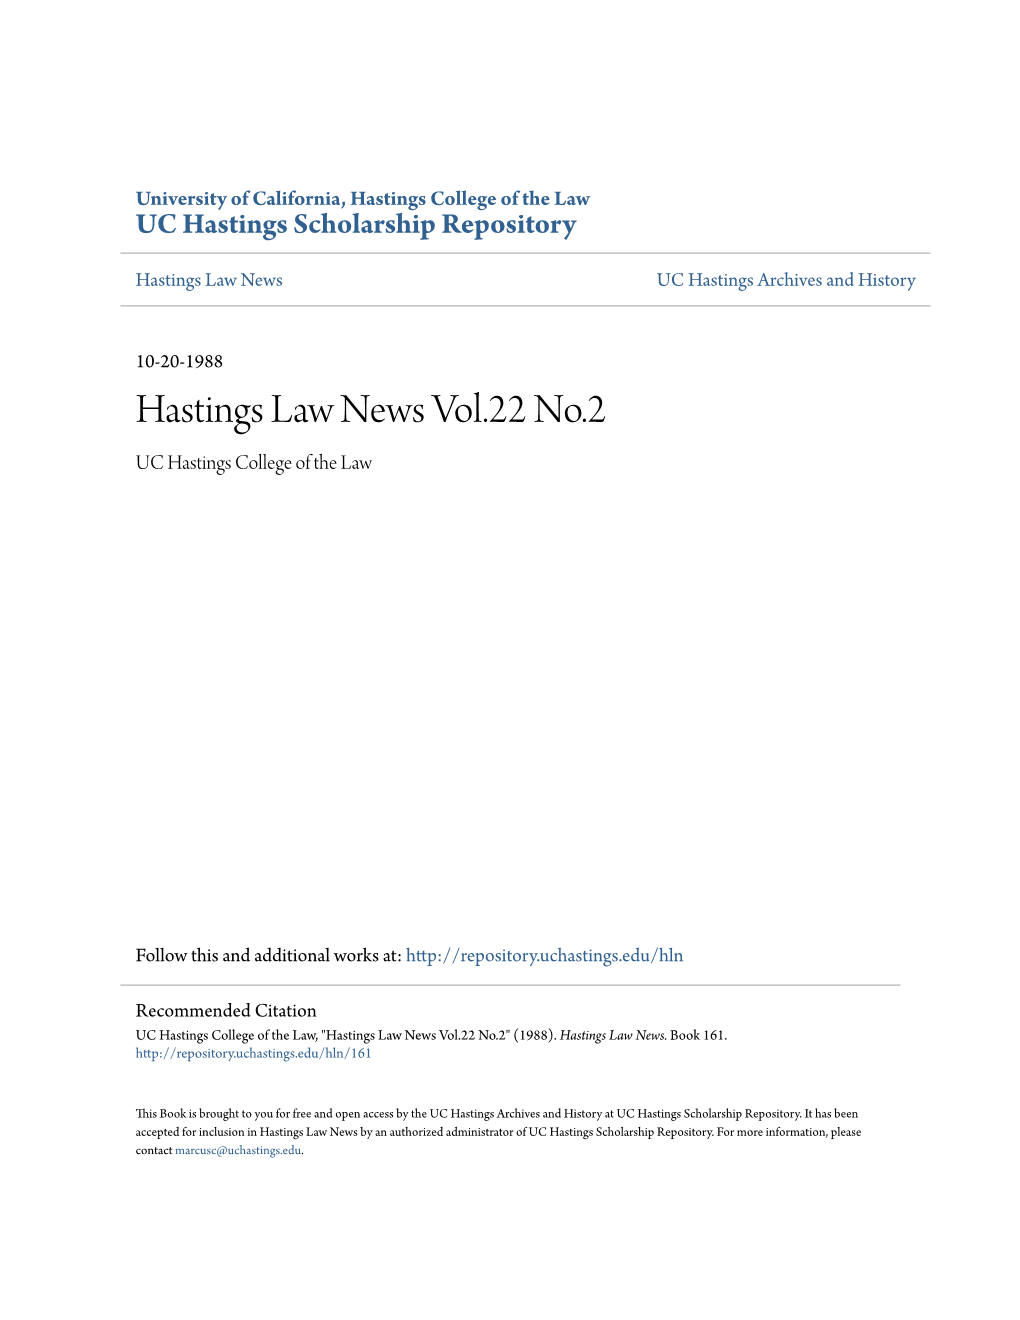 Hastings Law News Vol.22 No.2 UC Hastings College of the Law